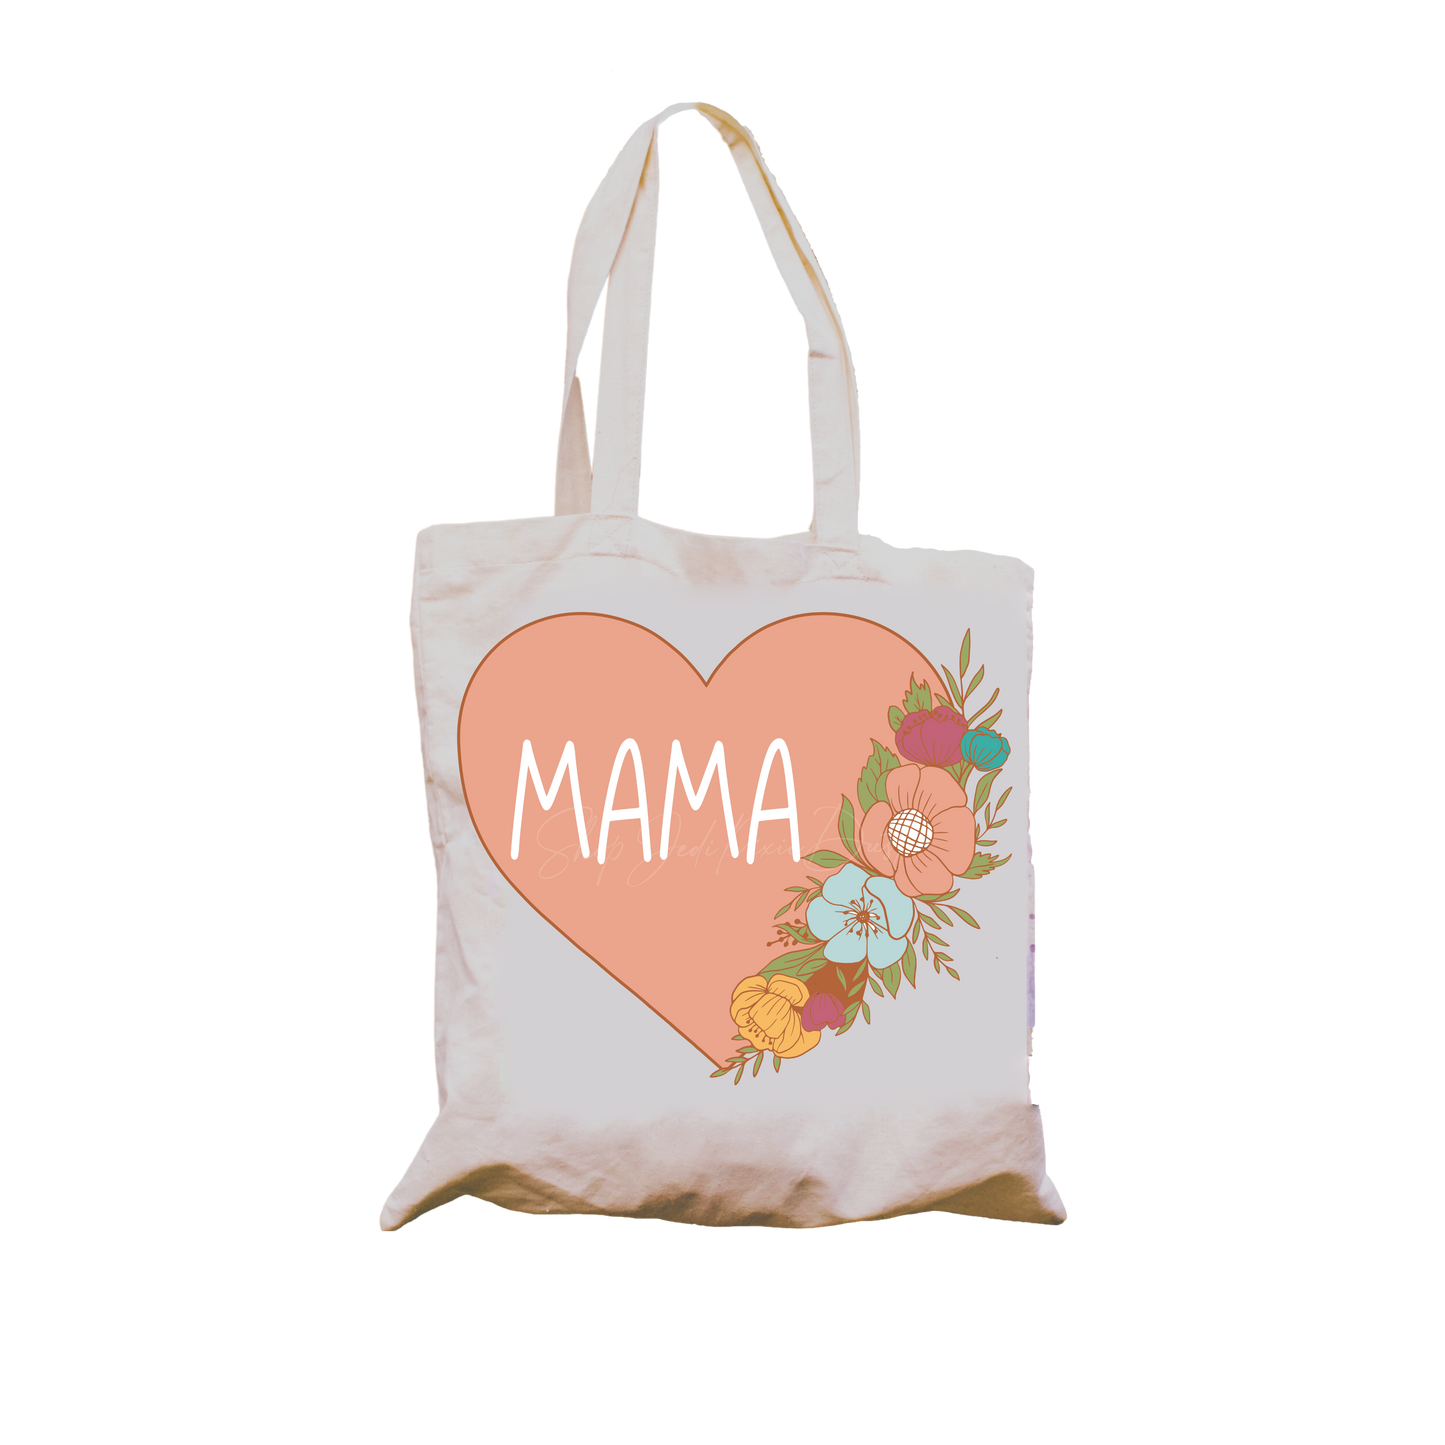 Mama's Floral Heart